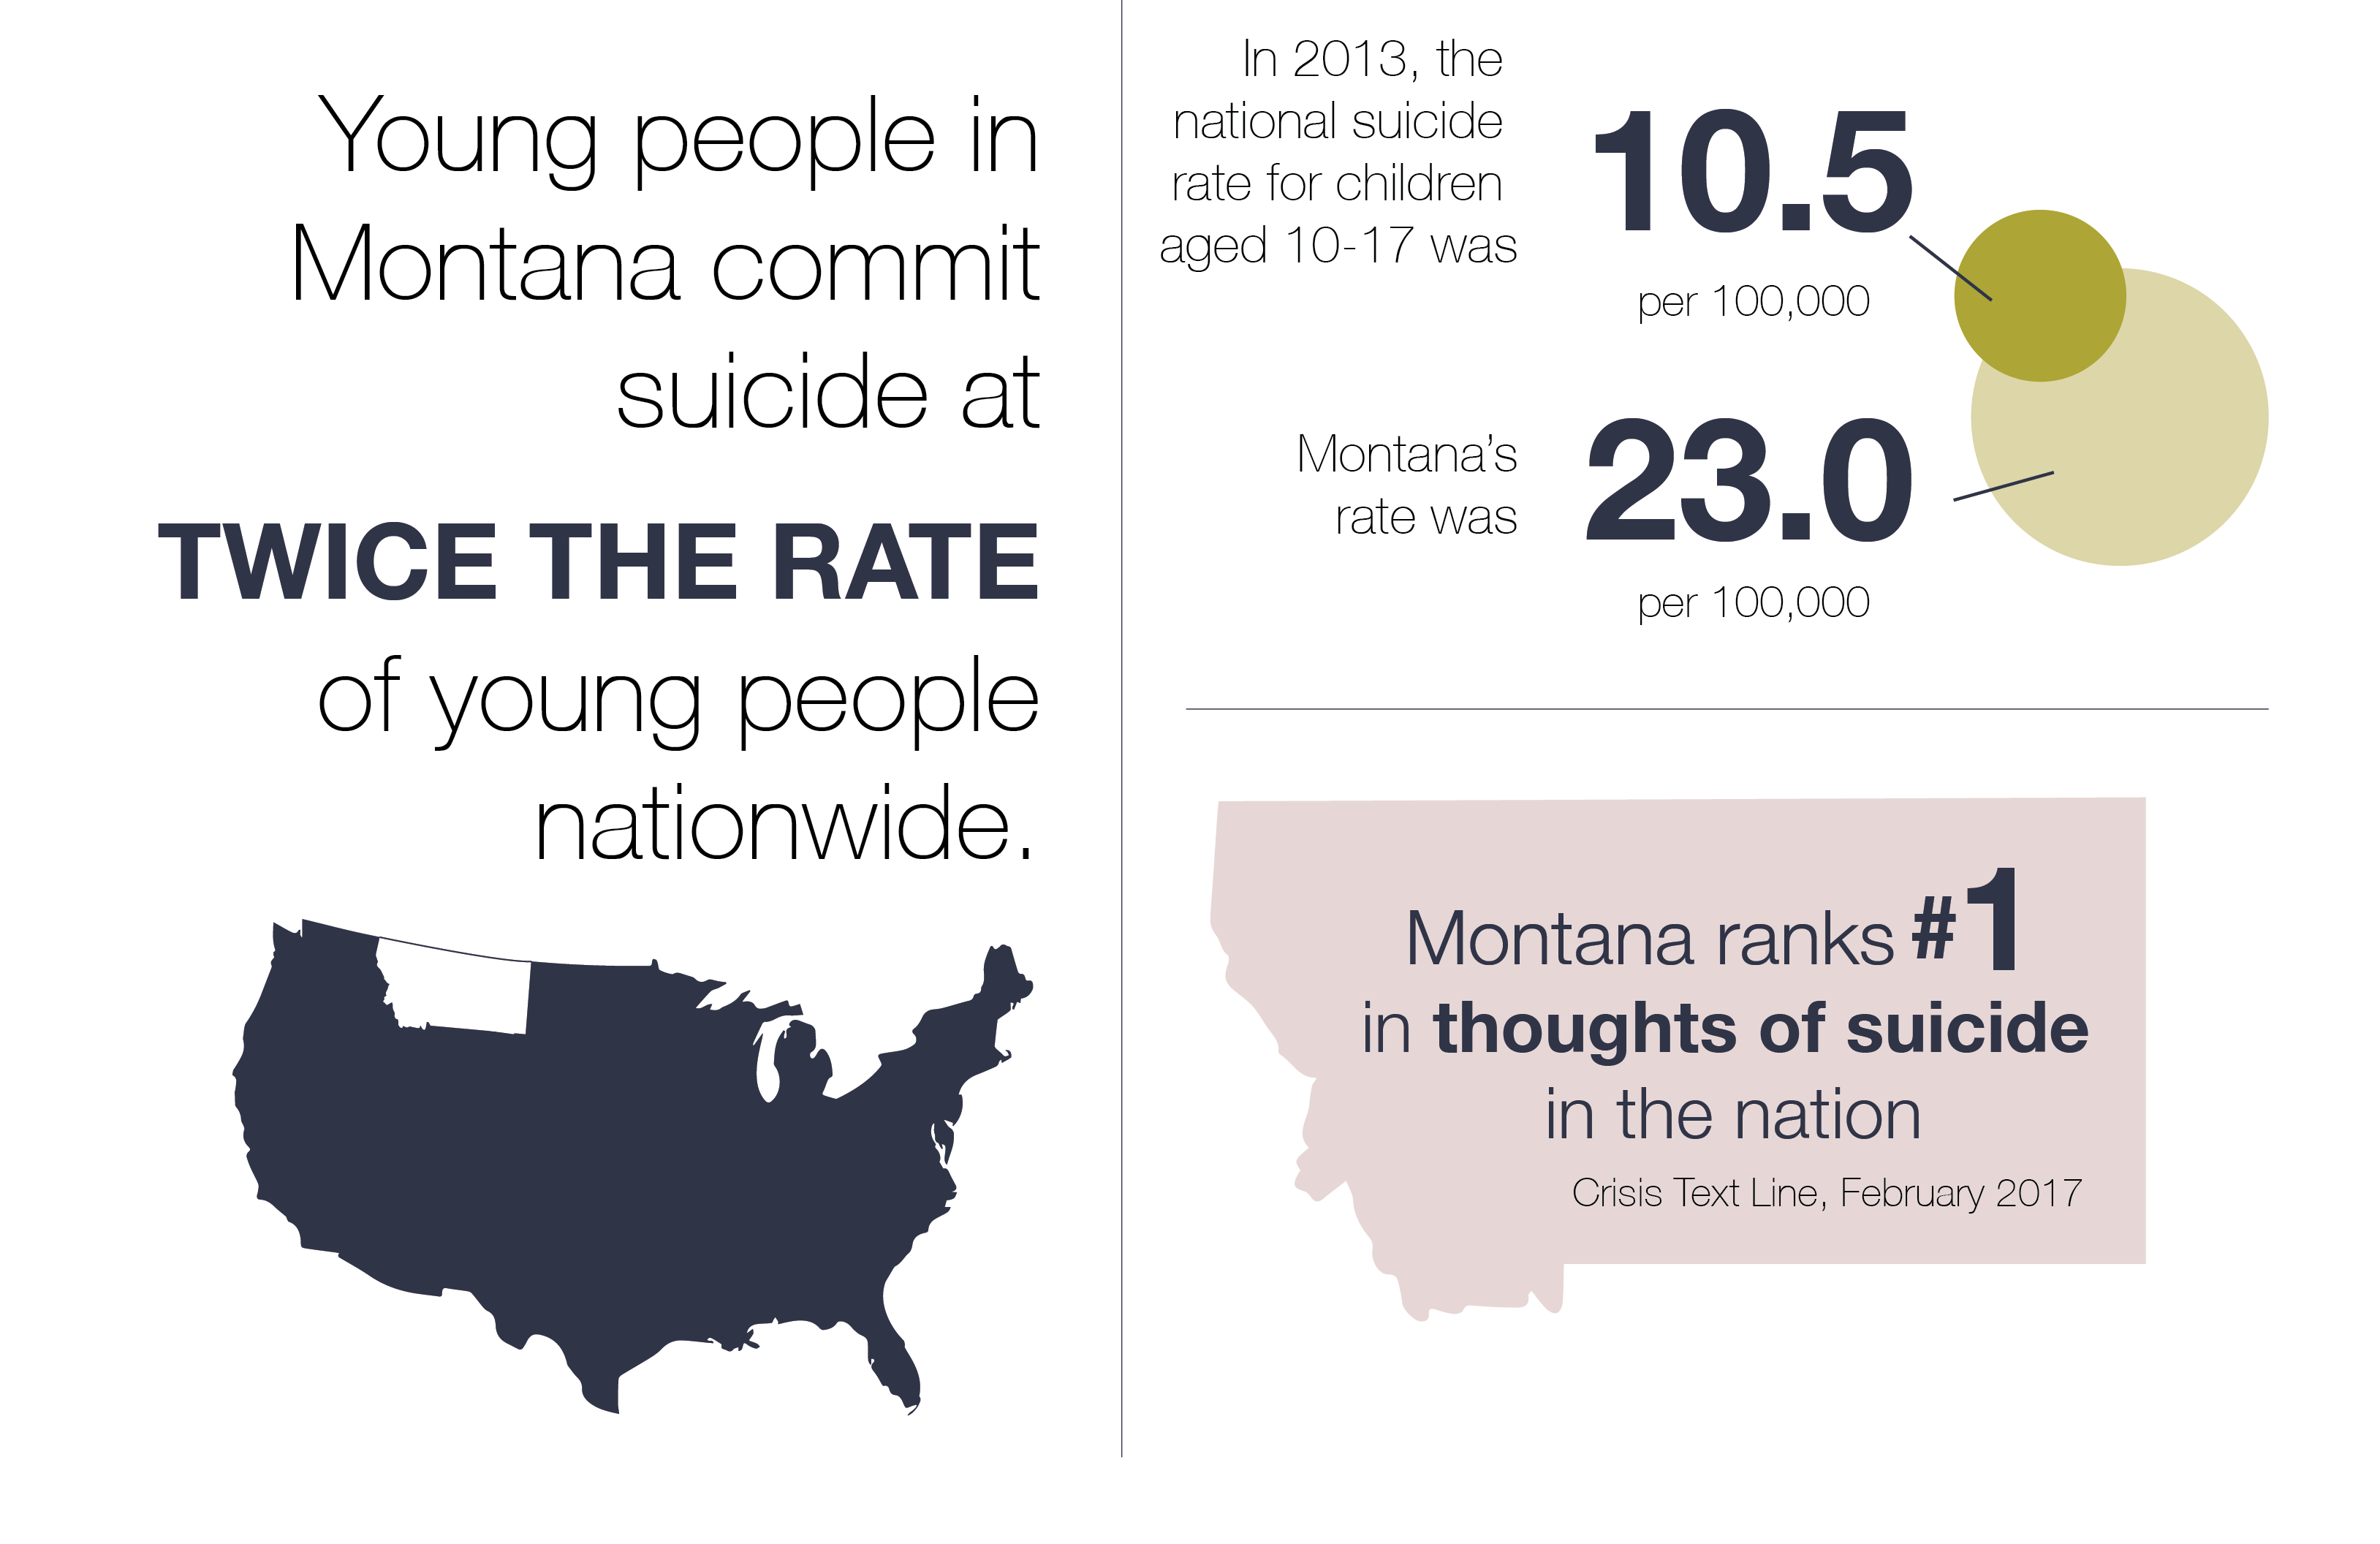 Young people in MT commit suicide at Twice the rate of young people nationwide. MT's rate of children suicide per 100,000 was 23 in 2013. The US's was 10.5.